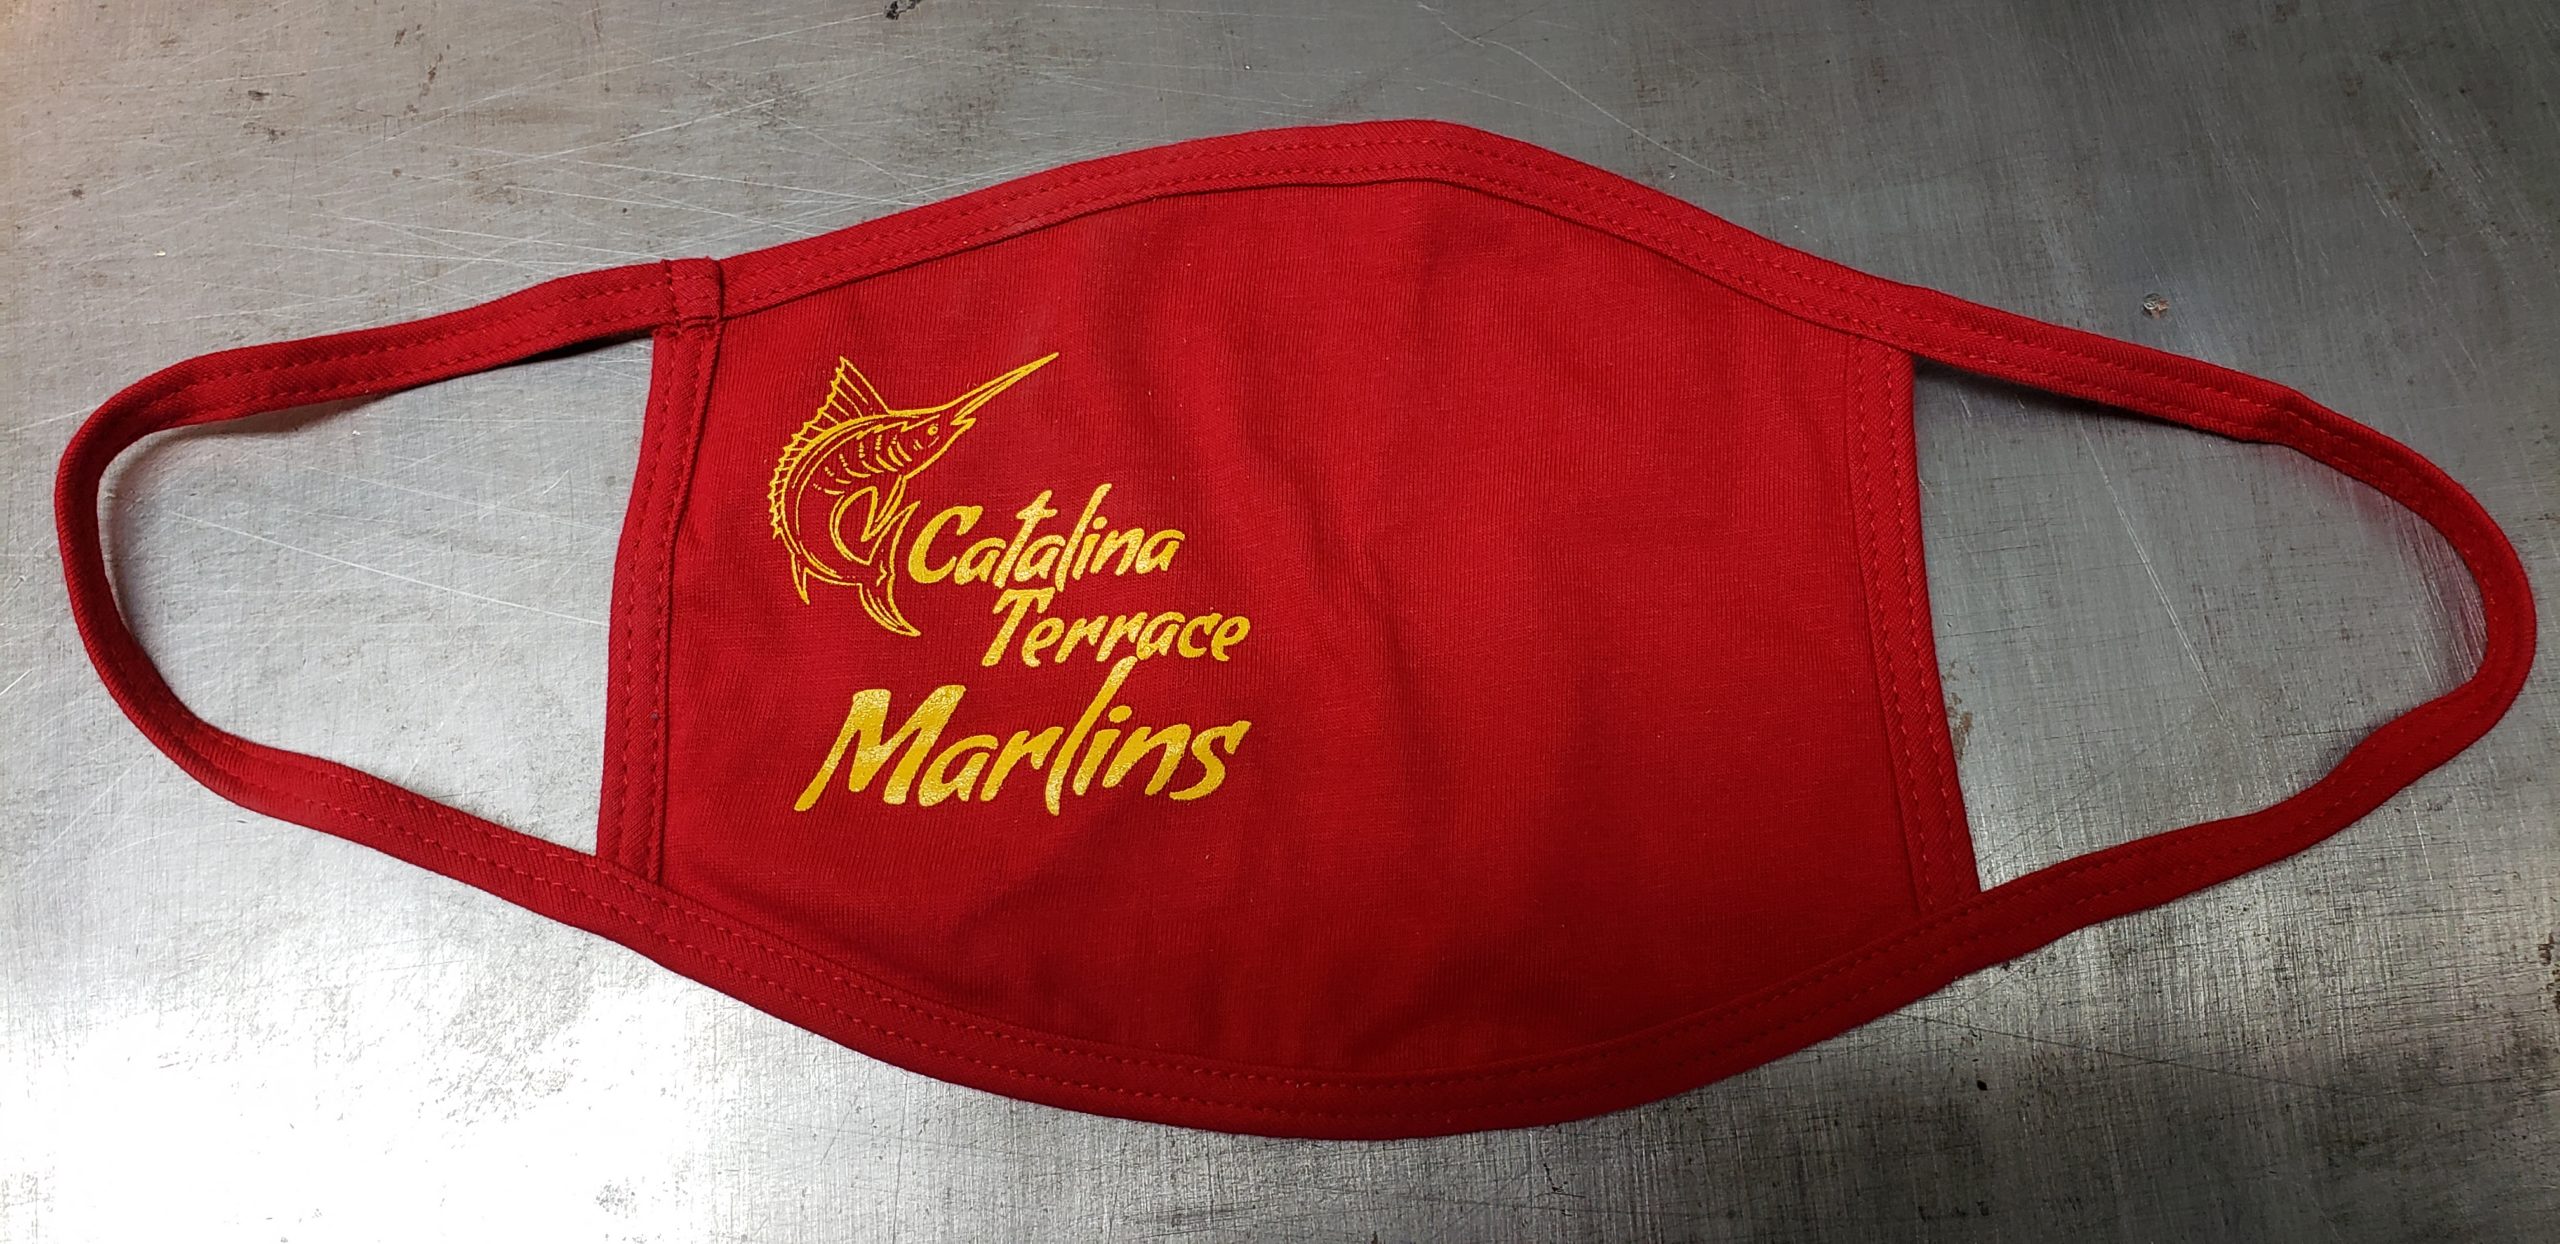 Crimson red cotton face mask with union screen printed one color design with a marlin that reads "Catalina Terrace Marlins"